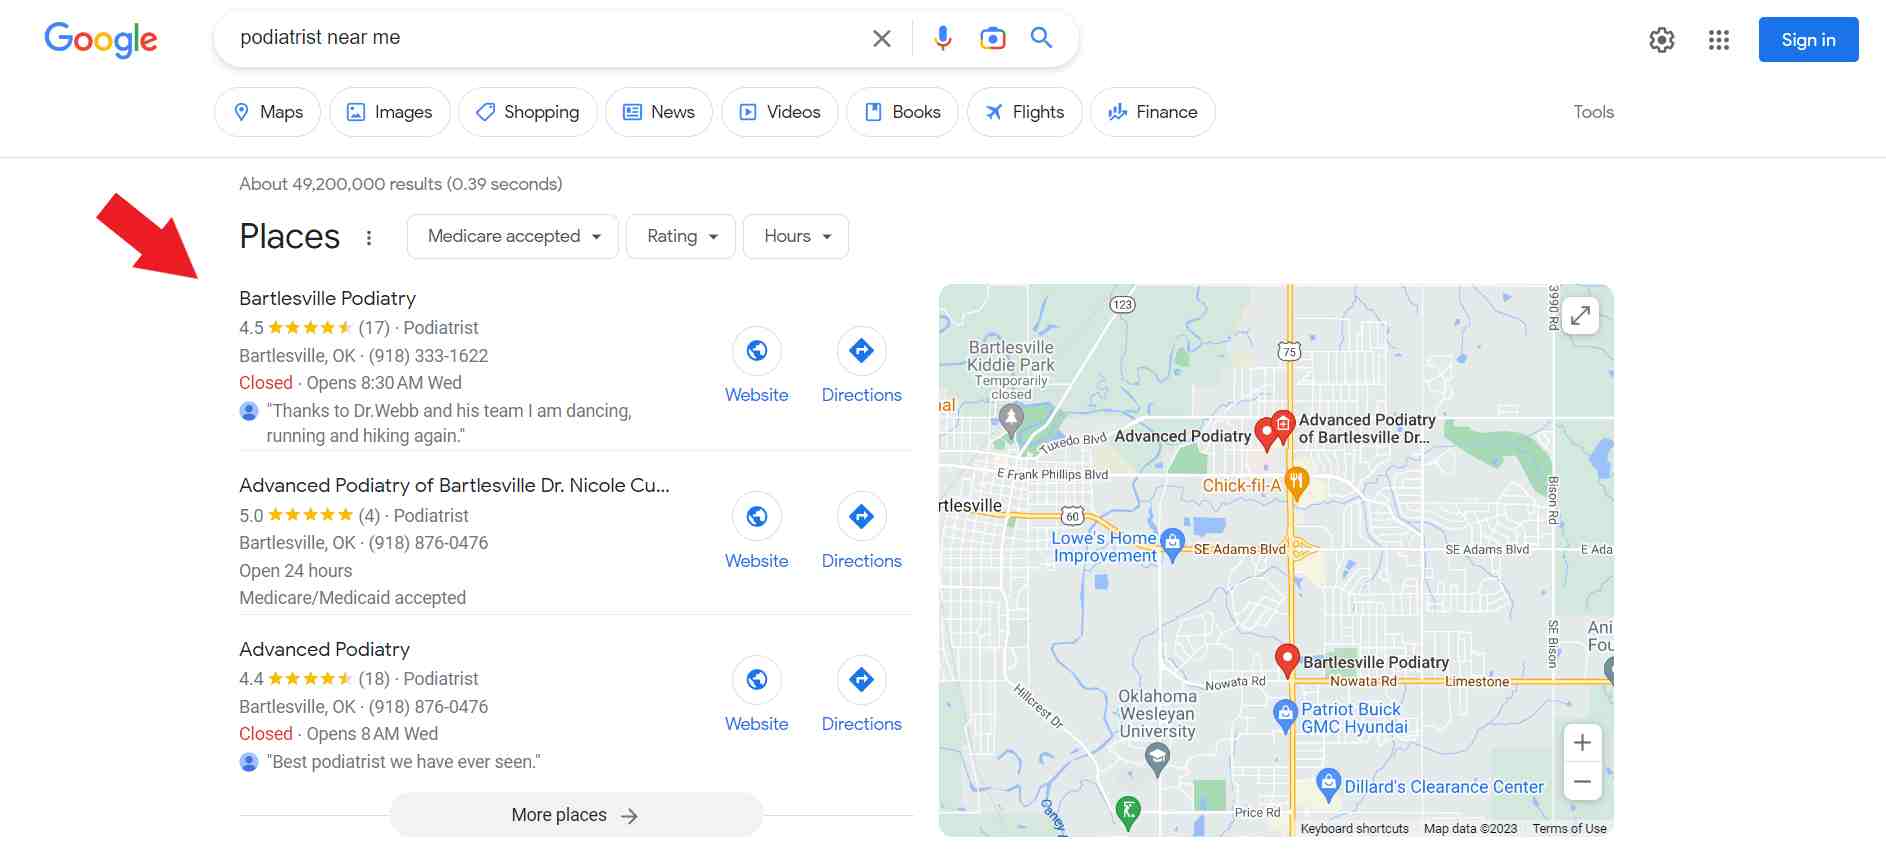 Google Search Results Page for podiatrists near me